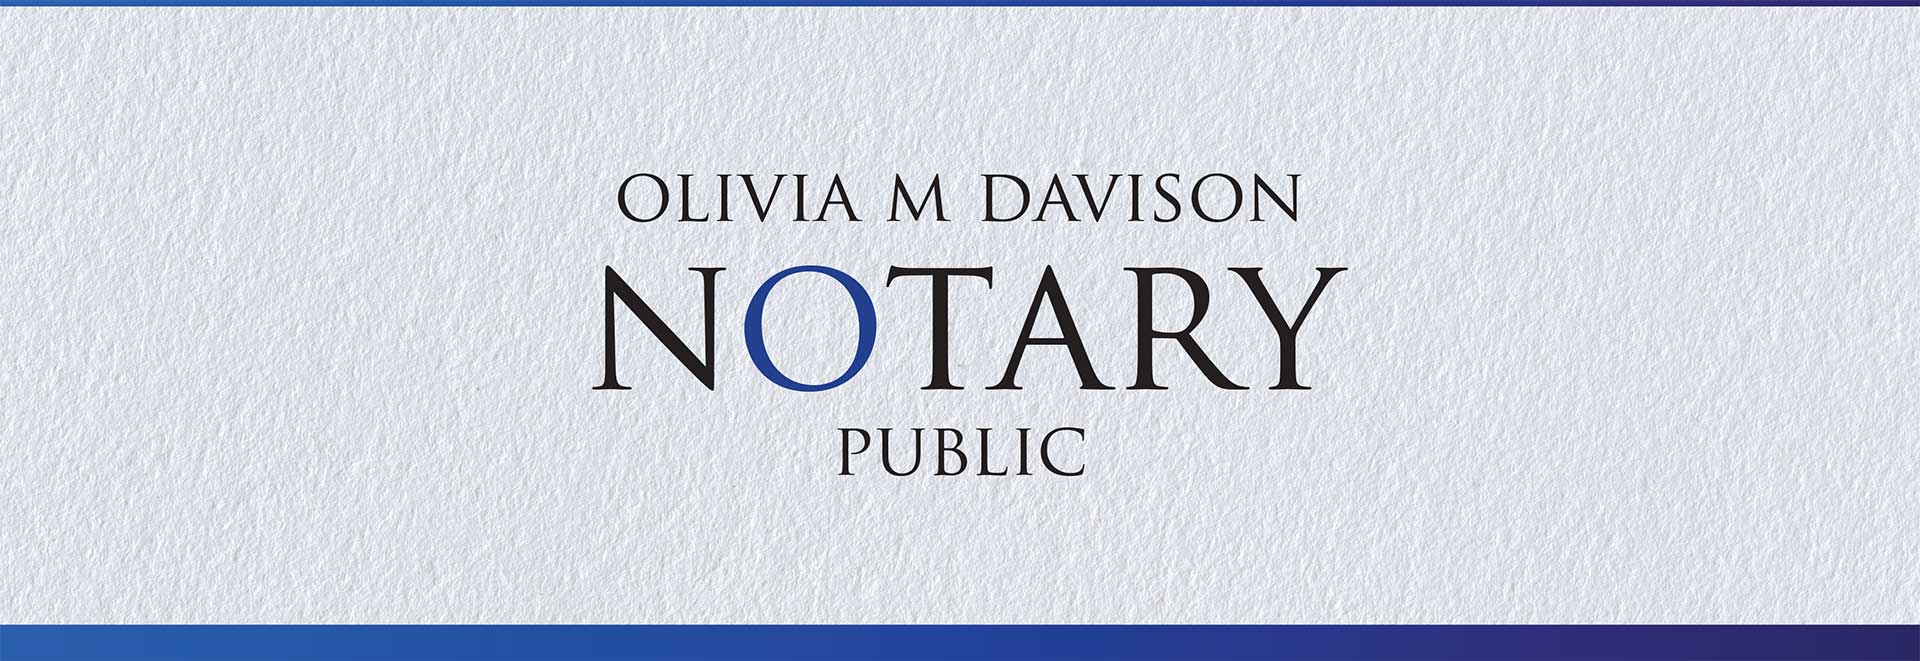 Notary Public Derby